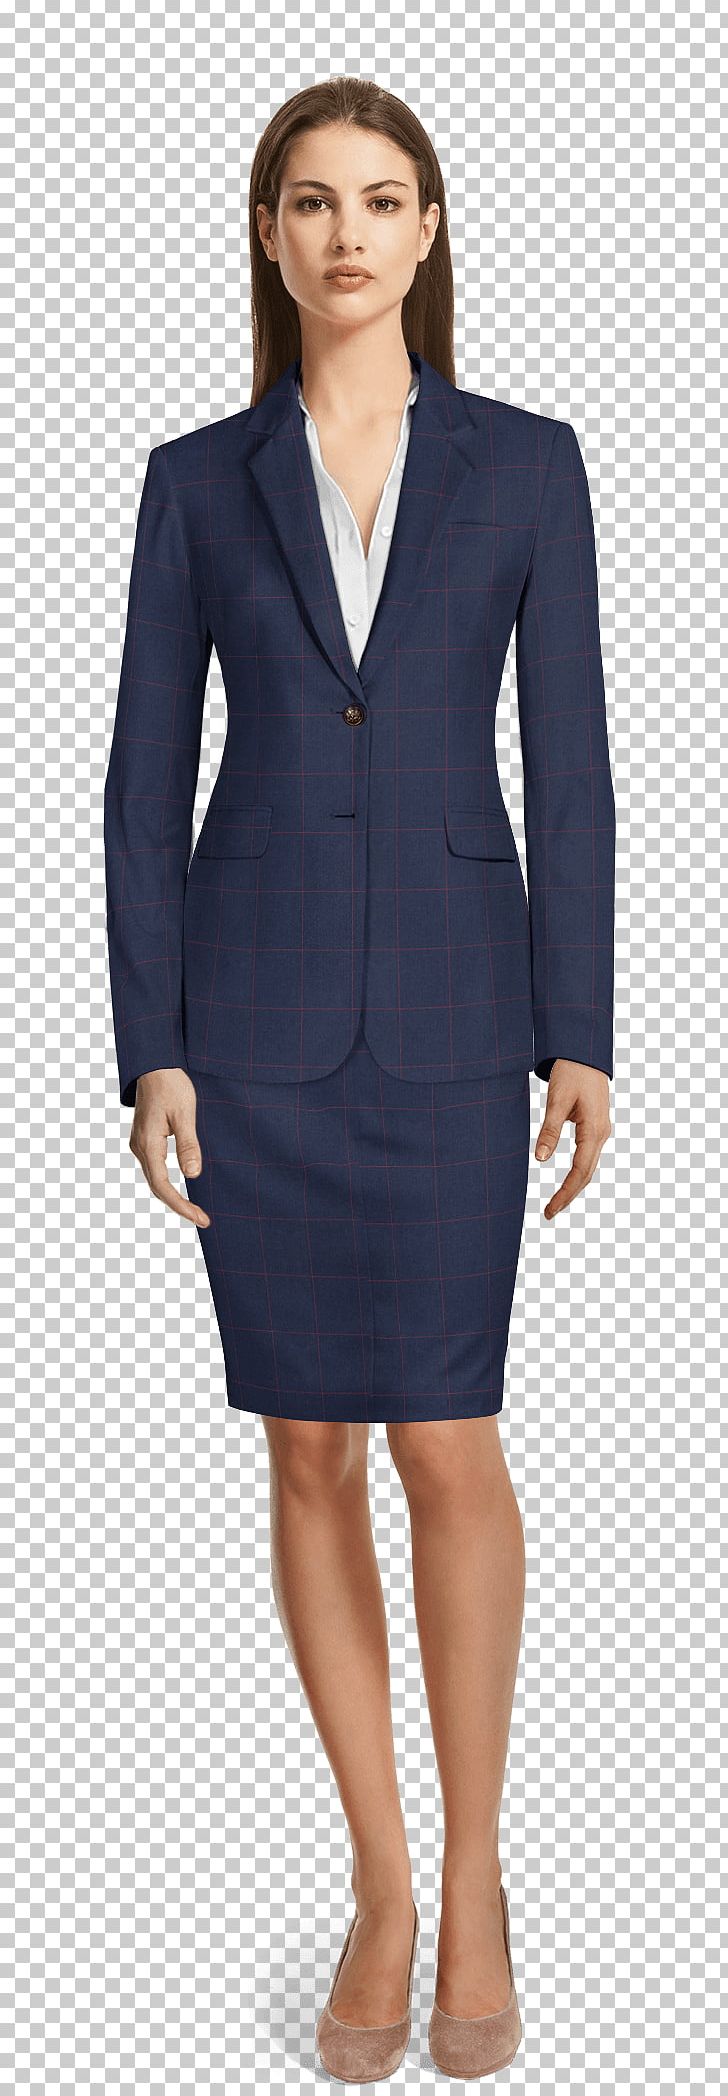 Pant Suits Clothing Jakkupuku Tailor PNG, Clipart, Blazer, Blue, Business, Businessperson, Clothing Free PNG Download